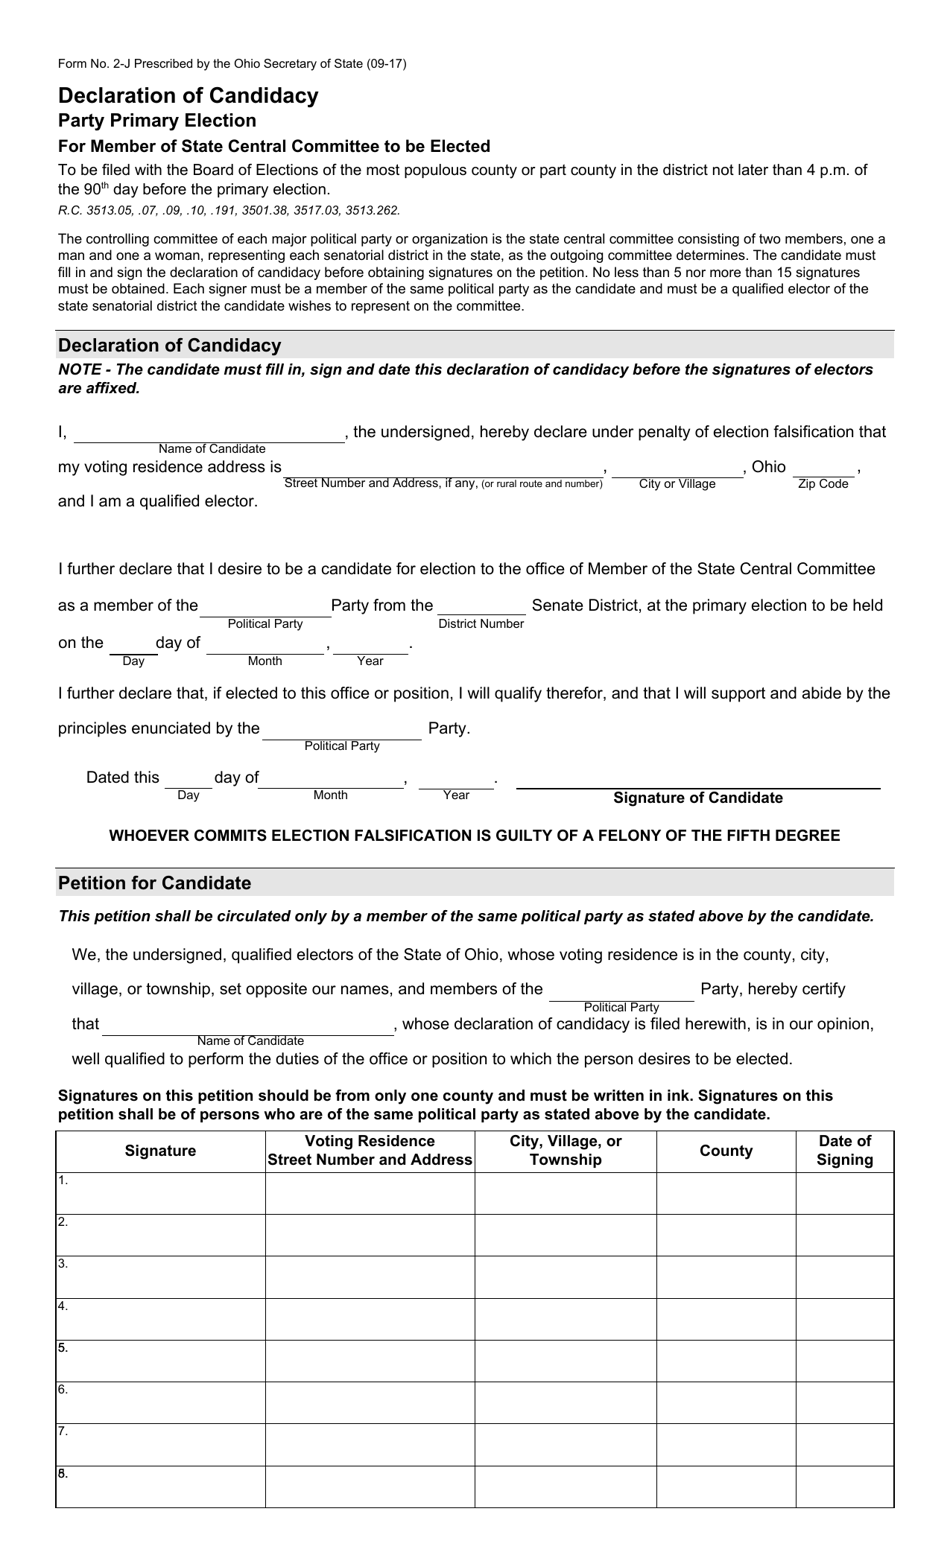 Form 2-J Declaration of Candidacy - State Central Committee to Be Elected at Party Primary Election - Ohio, Page 1